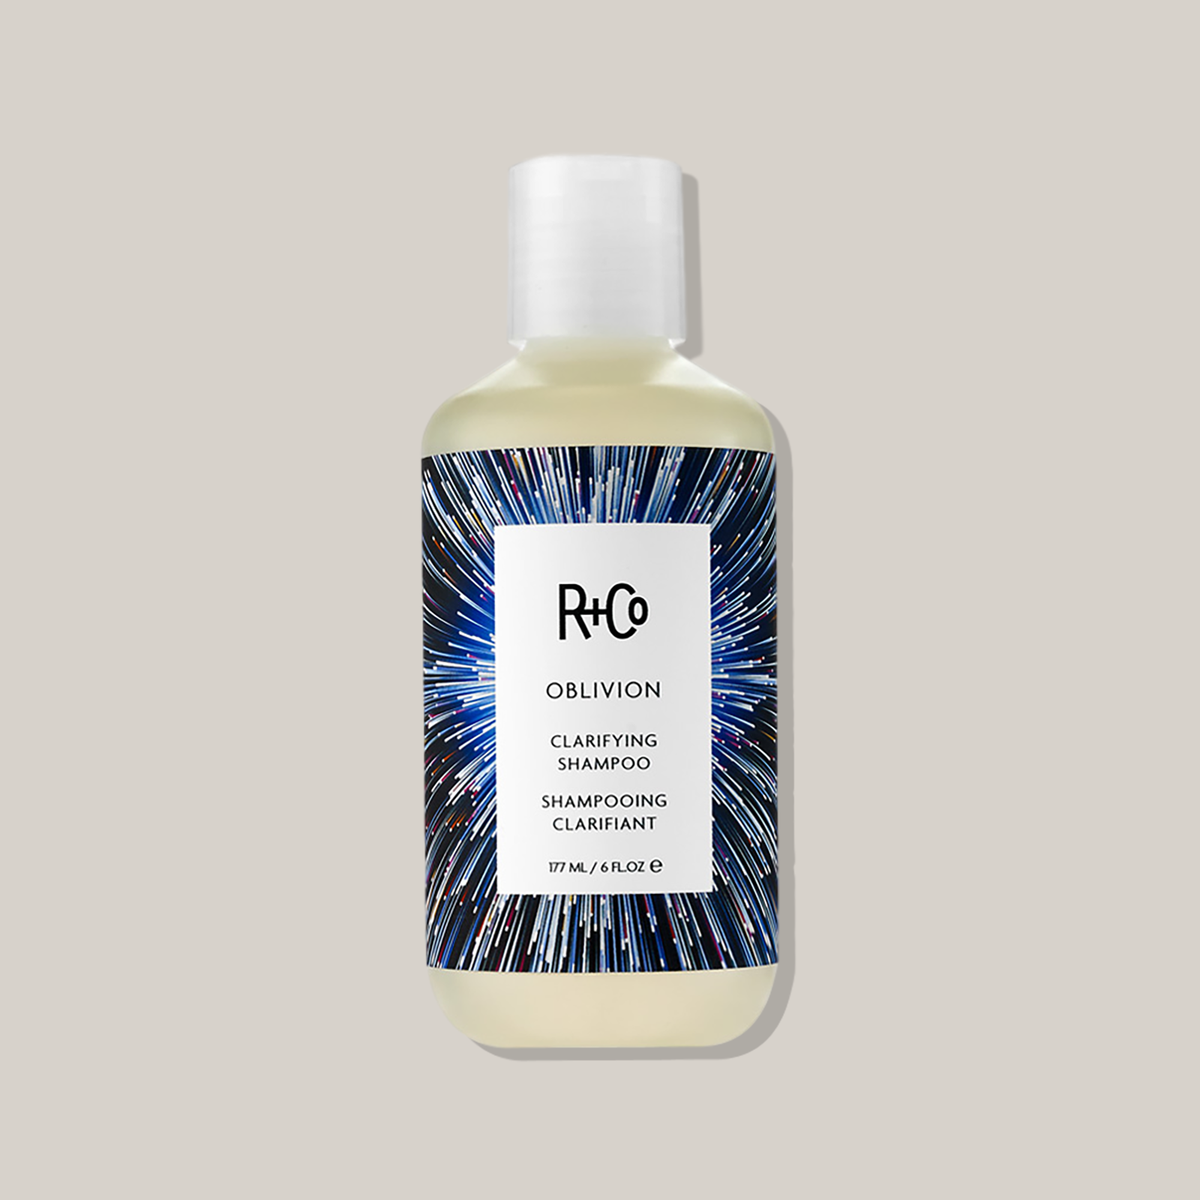 R+CO - Oblivion Clarifying Shampoo |6 oz| - by R+CO |ProCare Outlet|